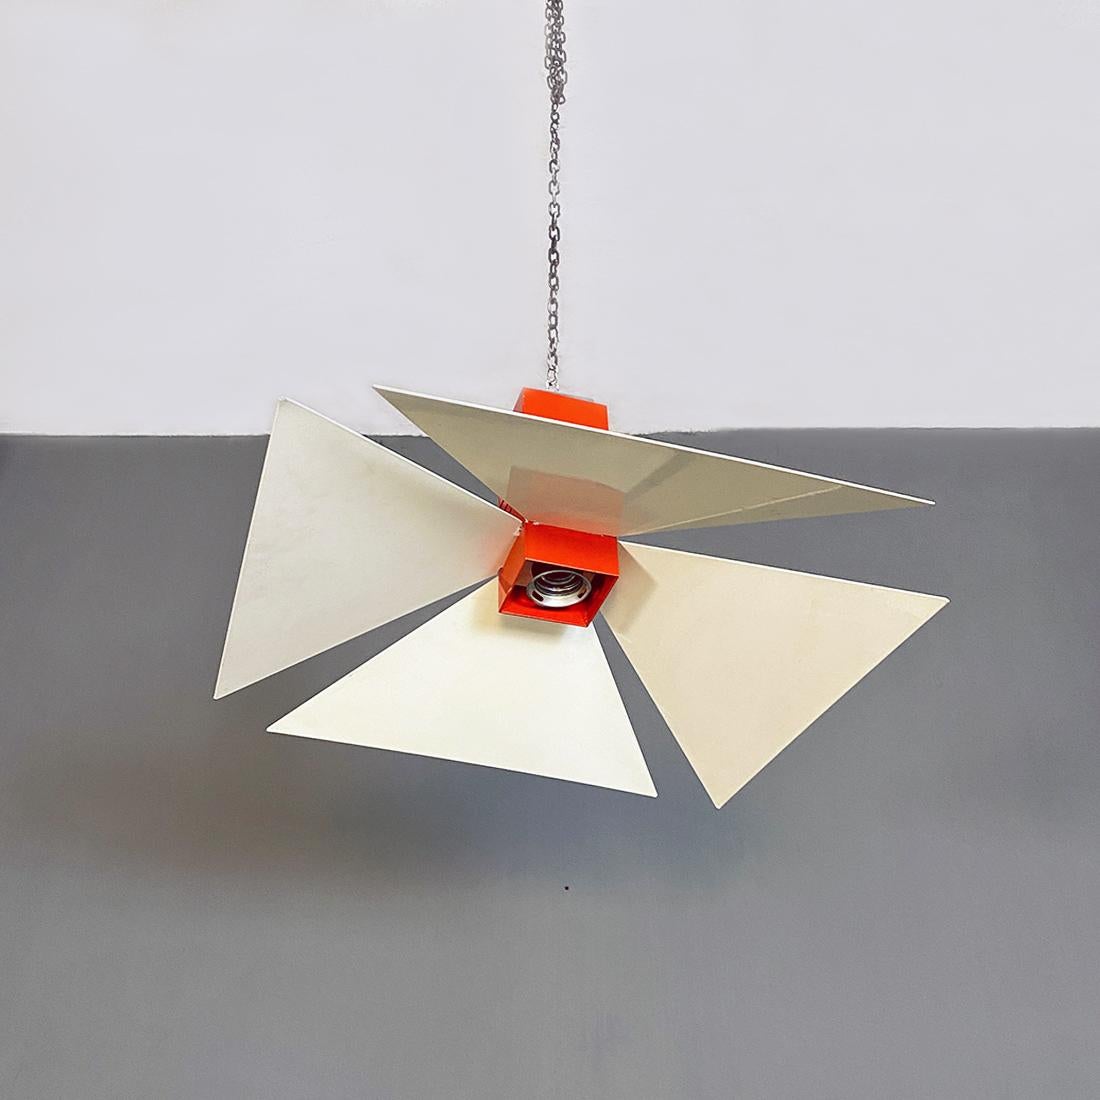 Late 20th Century Italian Modern Orange and White Metal Chandelier, 1980s For Sale